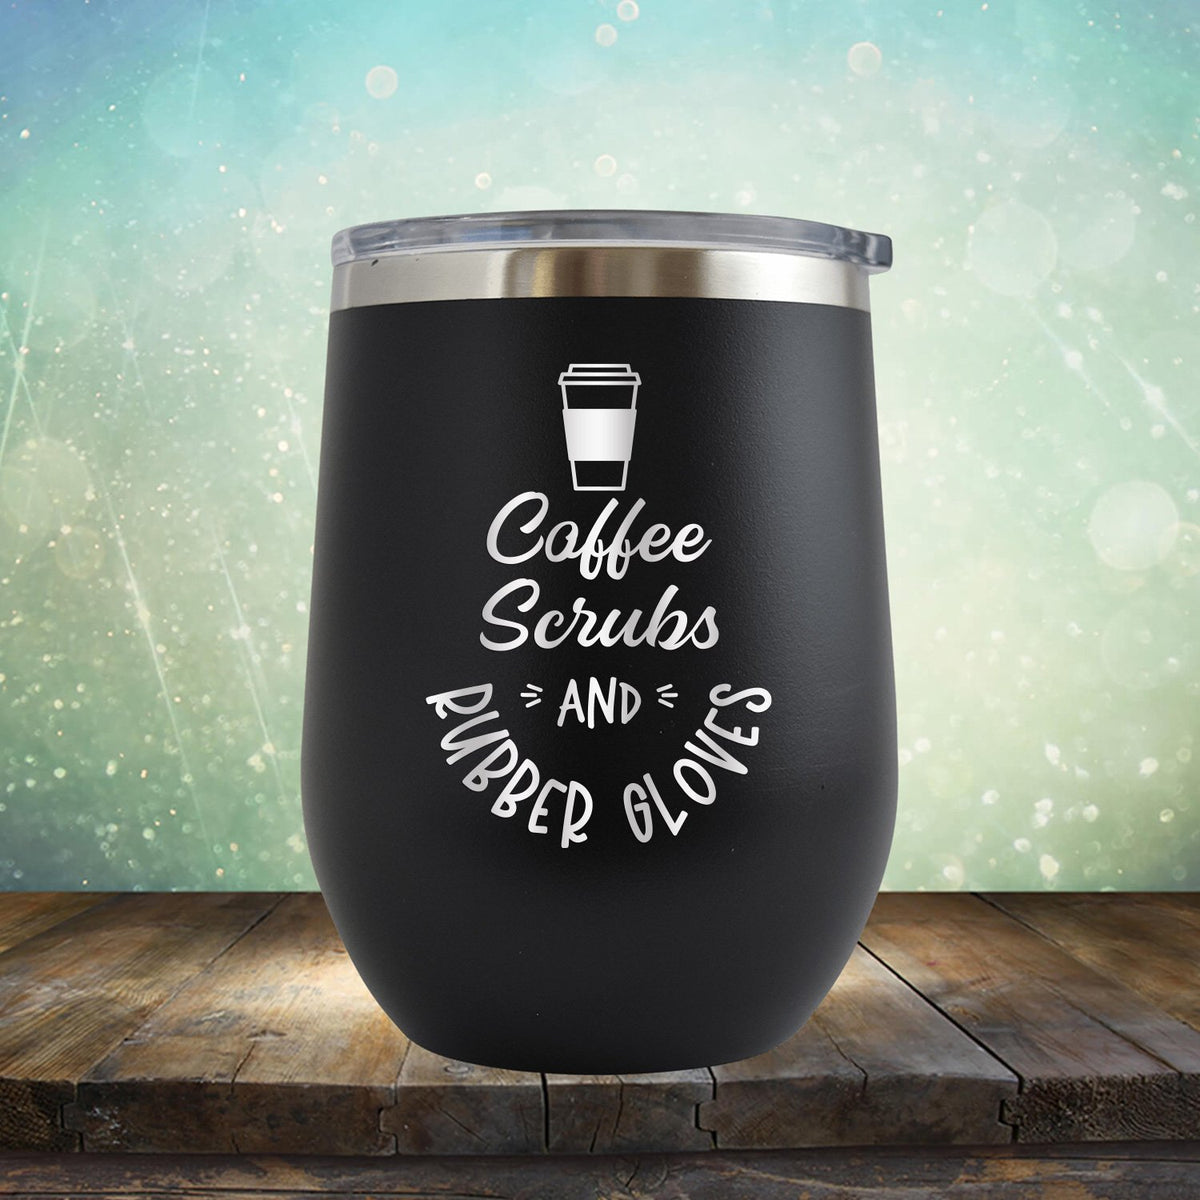 Coffee Scrubs and Rubber Gloves - Stemless Wine Cup